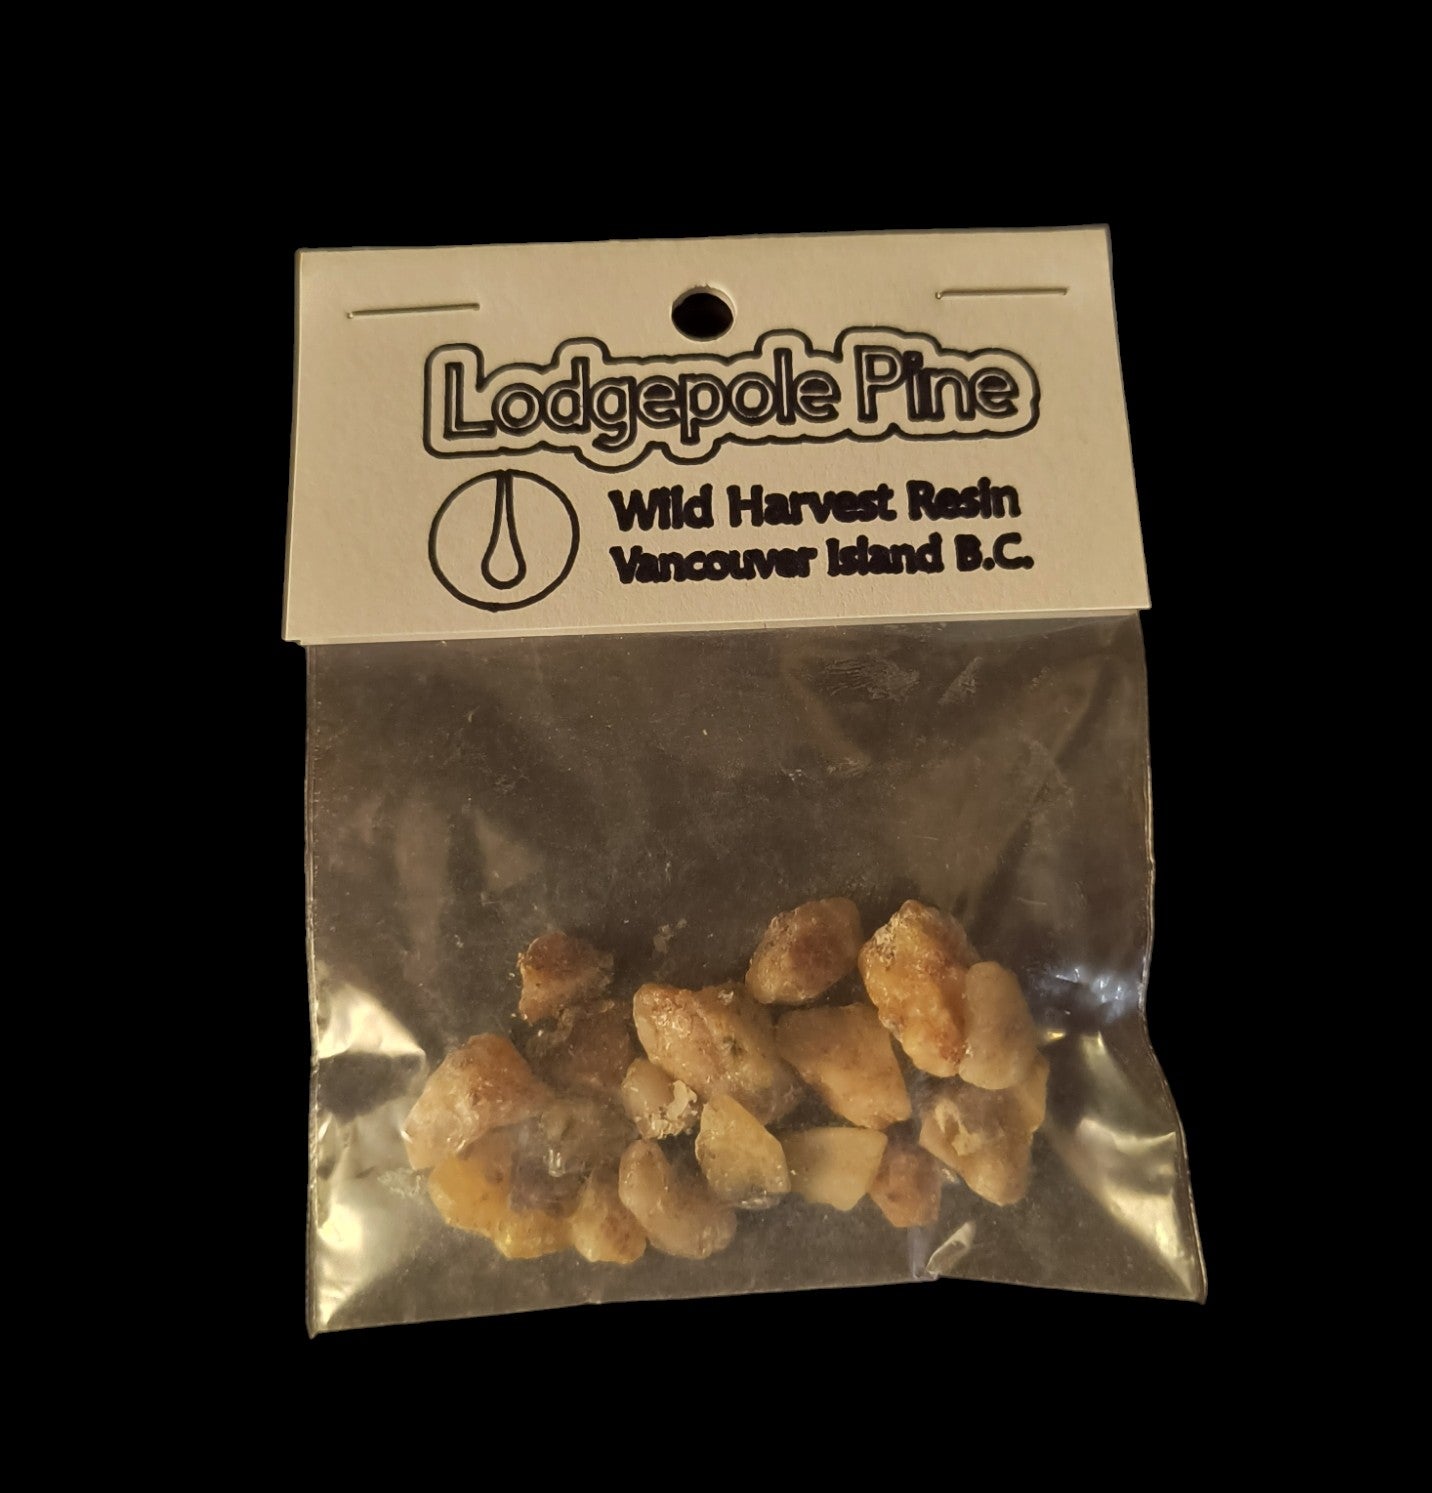 Resin Incense - Lodgepole Pine - Size #4